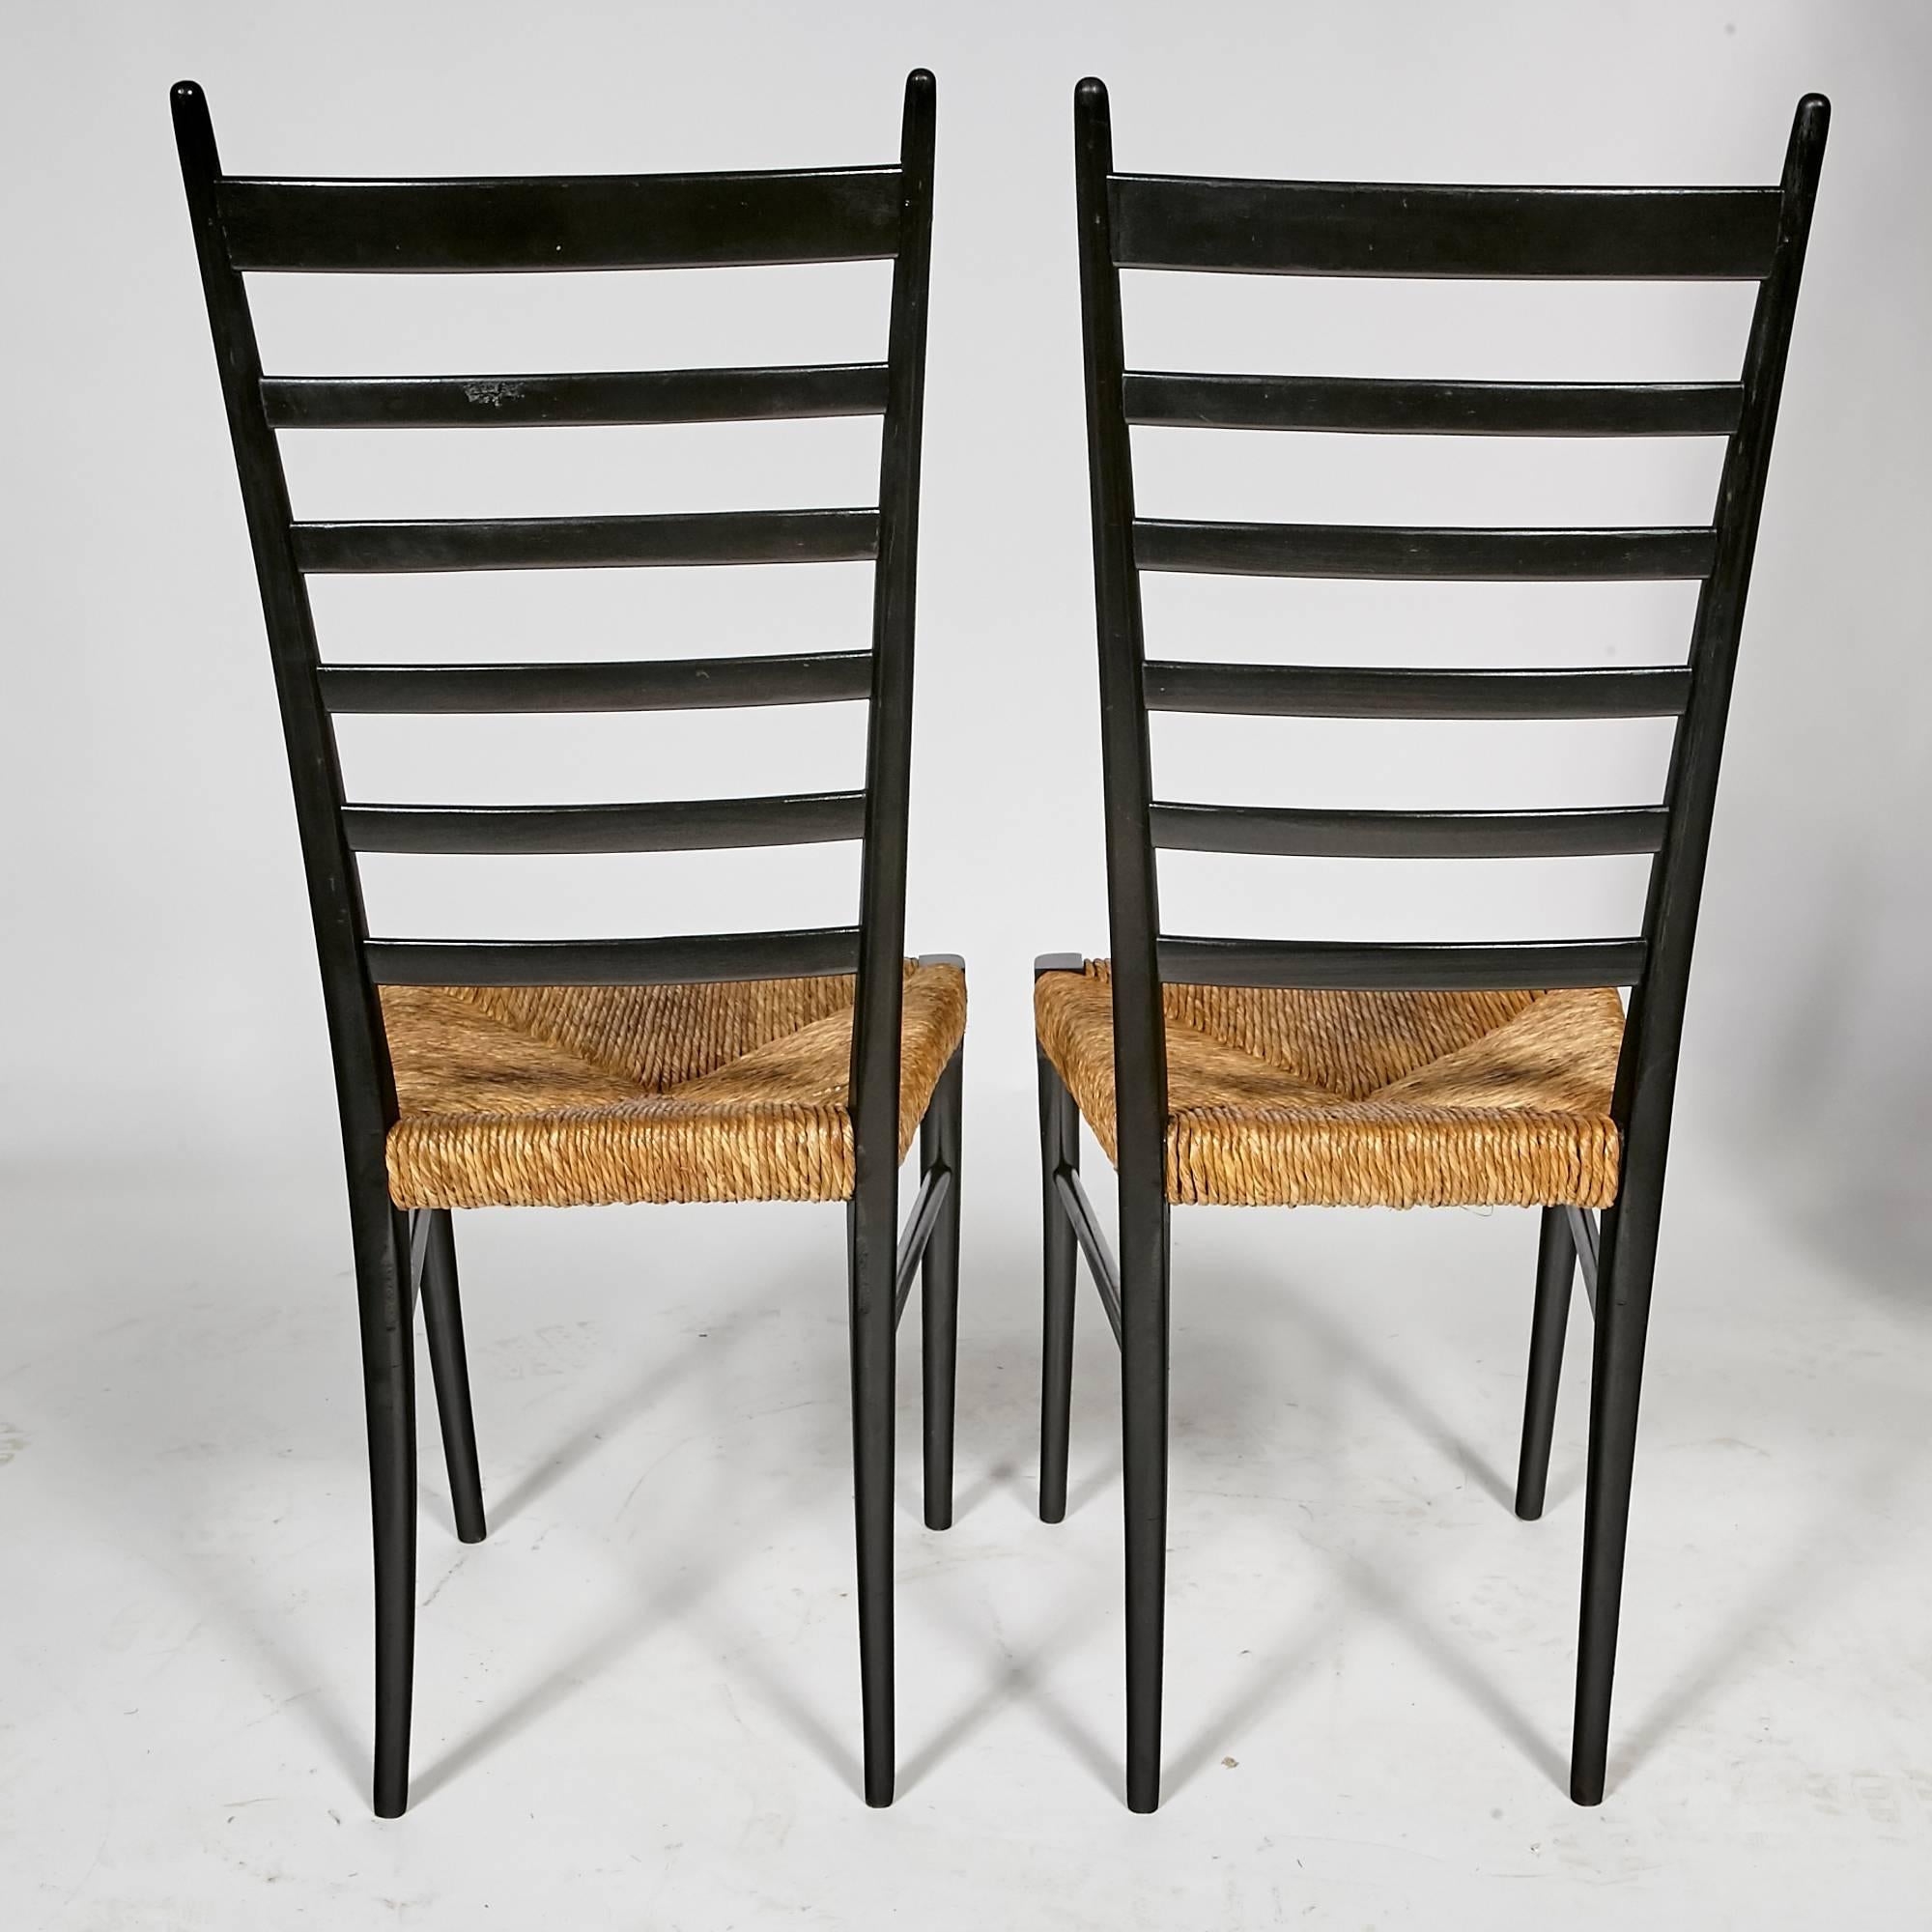 Rush Gio Ponti Ladder Back Chairs, 1950s For Sale